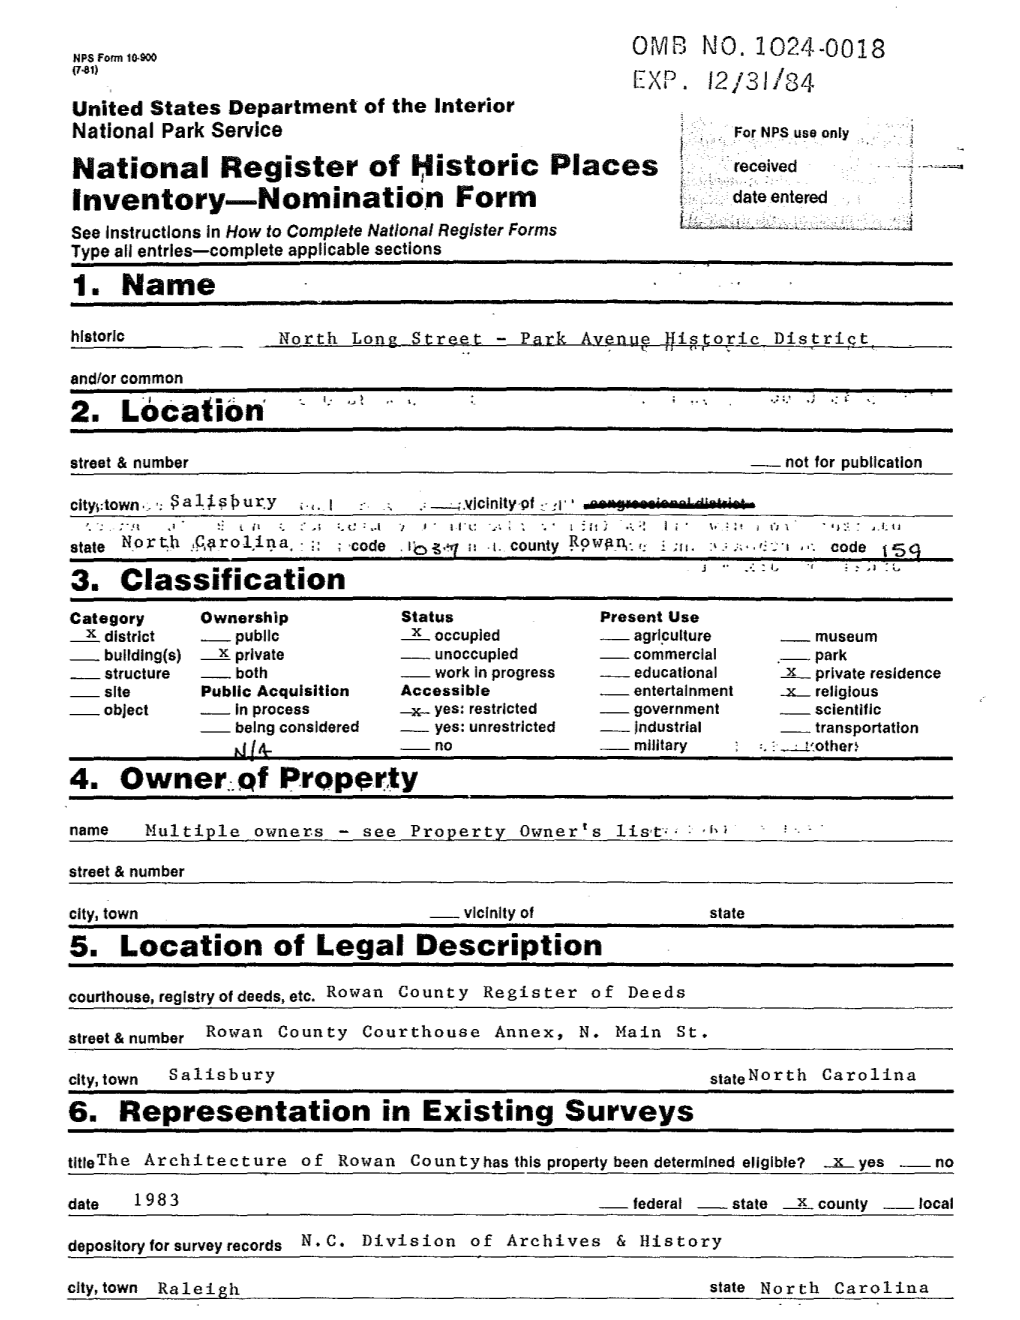 Tistoric Places Inventory-Nomination Form 1. Name 2. Location